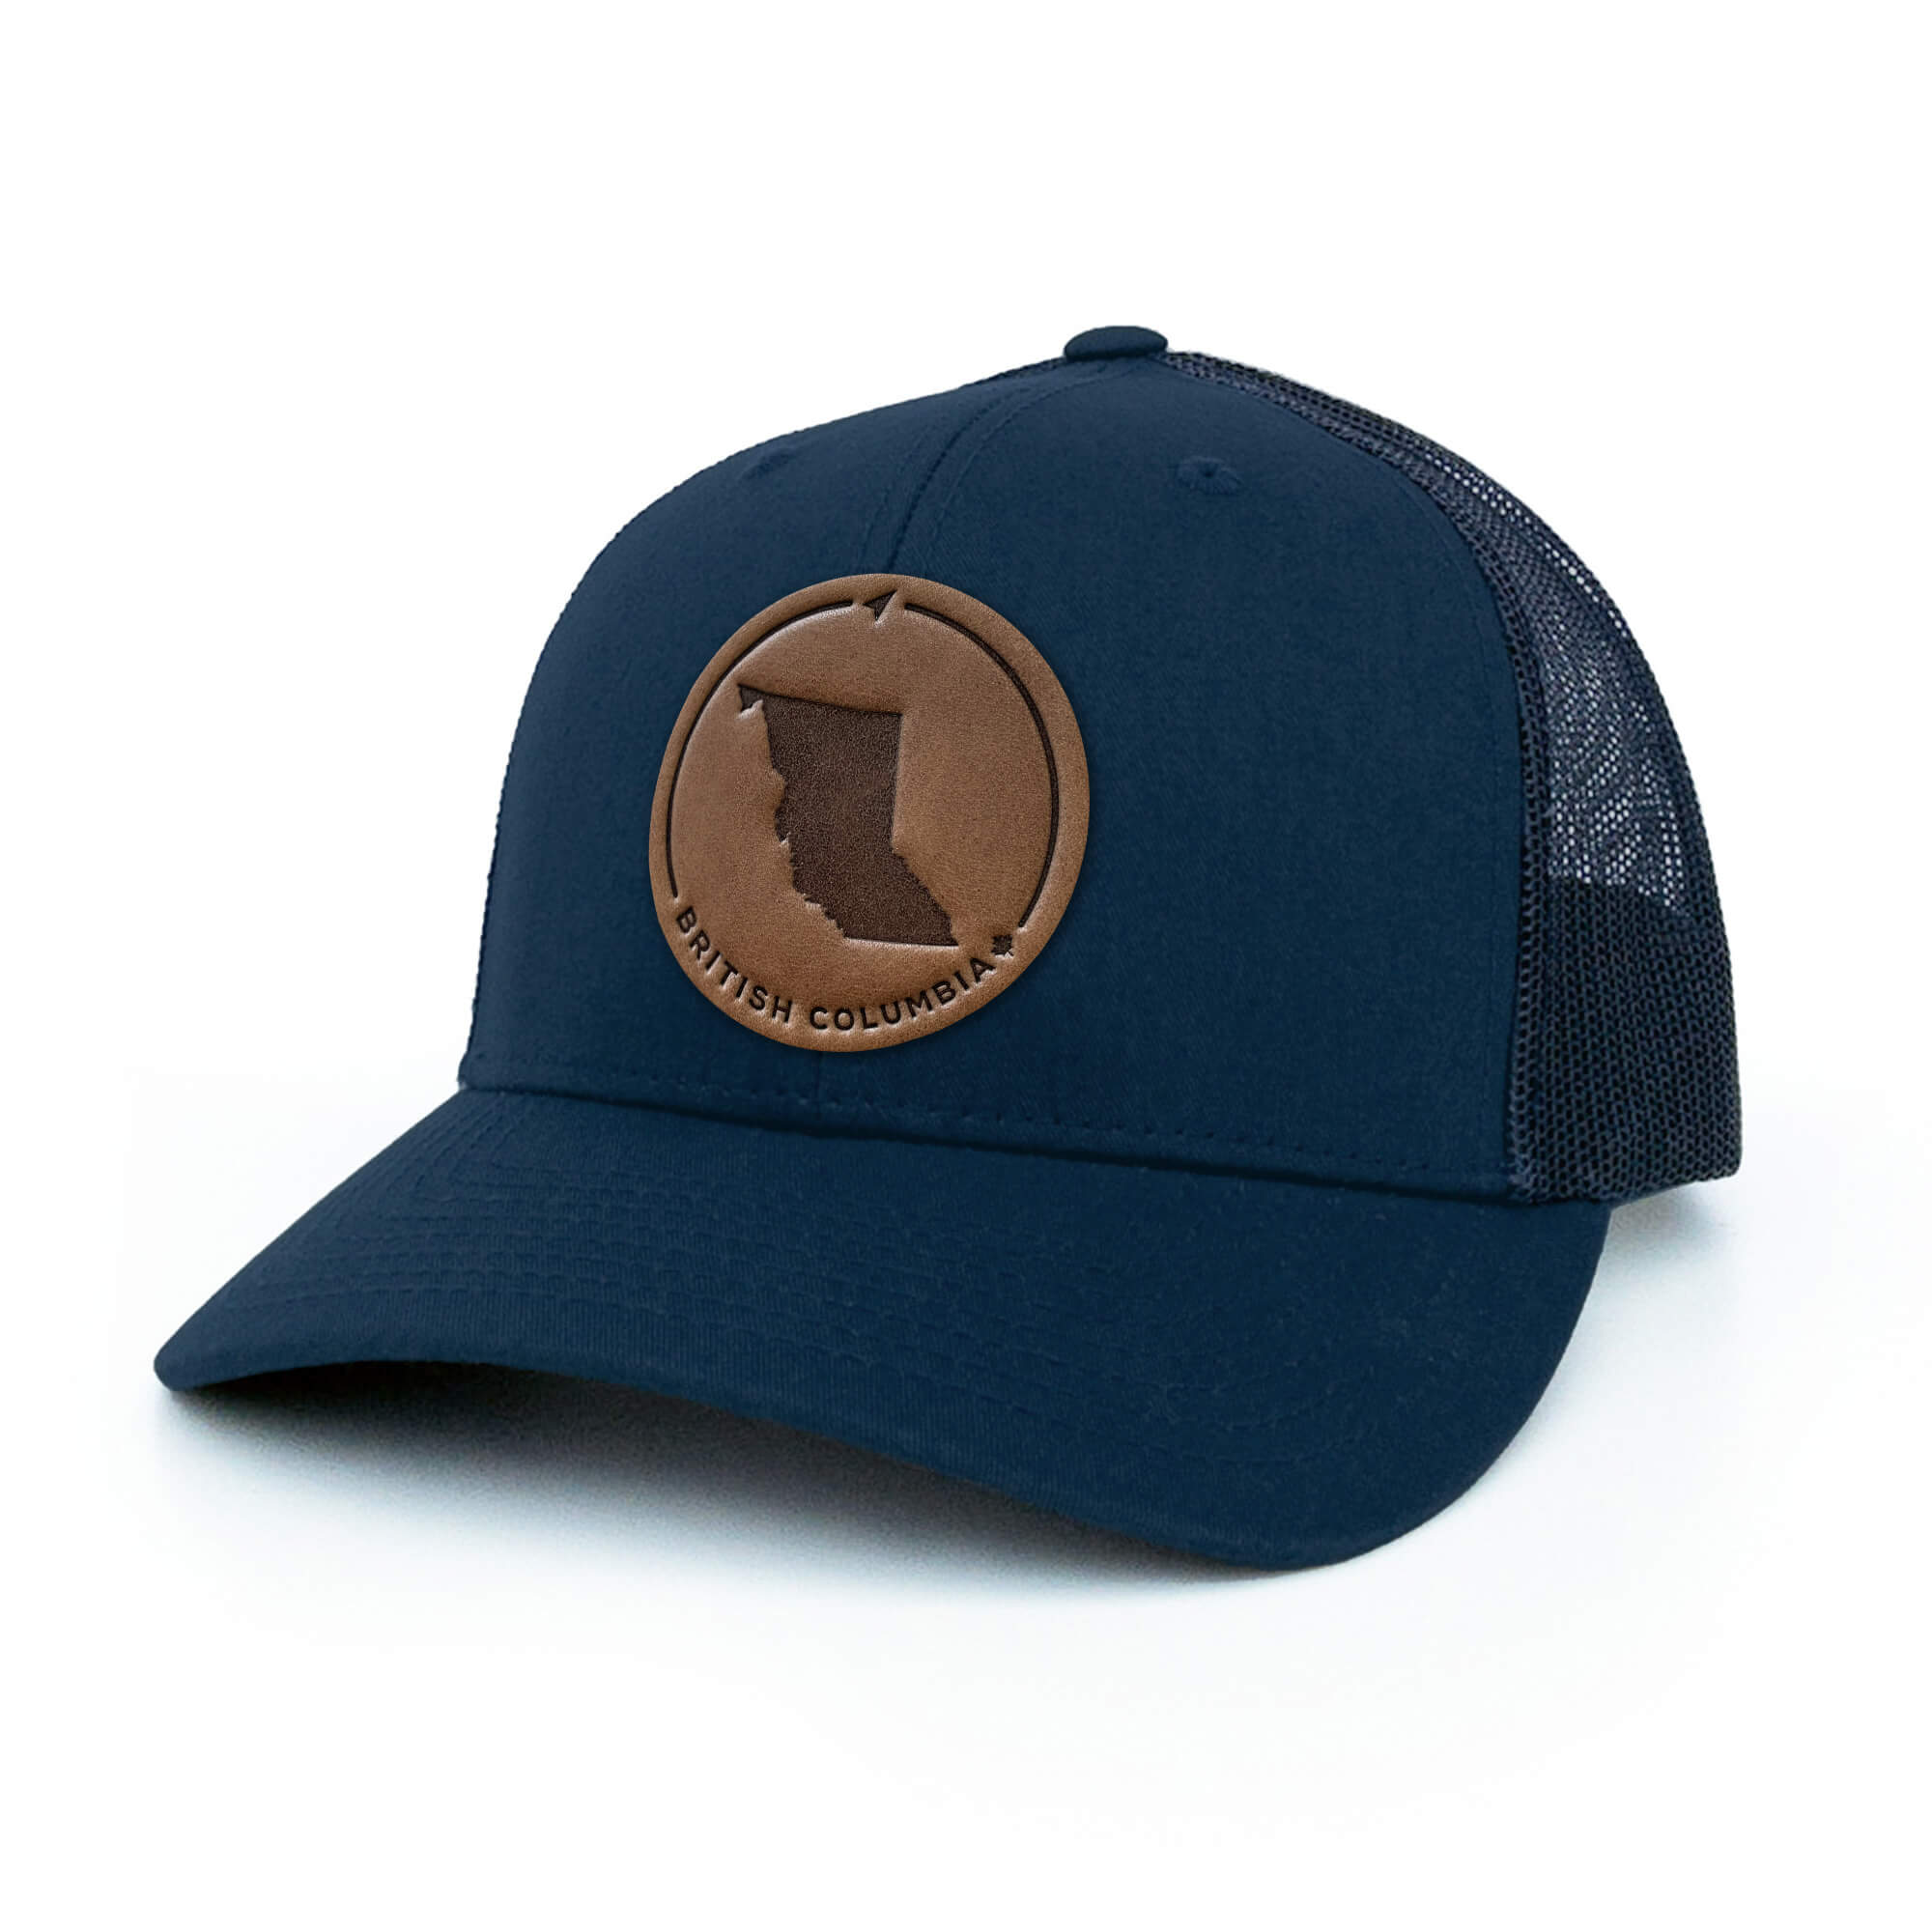 Navy trucker hat with full-grain leather patch of British Columbia | BLACK-002-004, CHARC-002-004, NAVY-002-004, HGREY-002-004, MOSS-002-004, BROWN-002-004